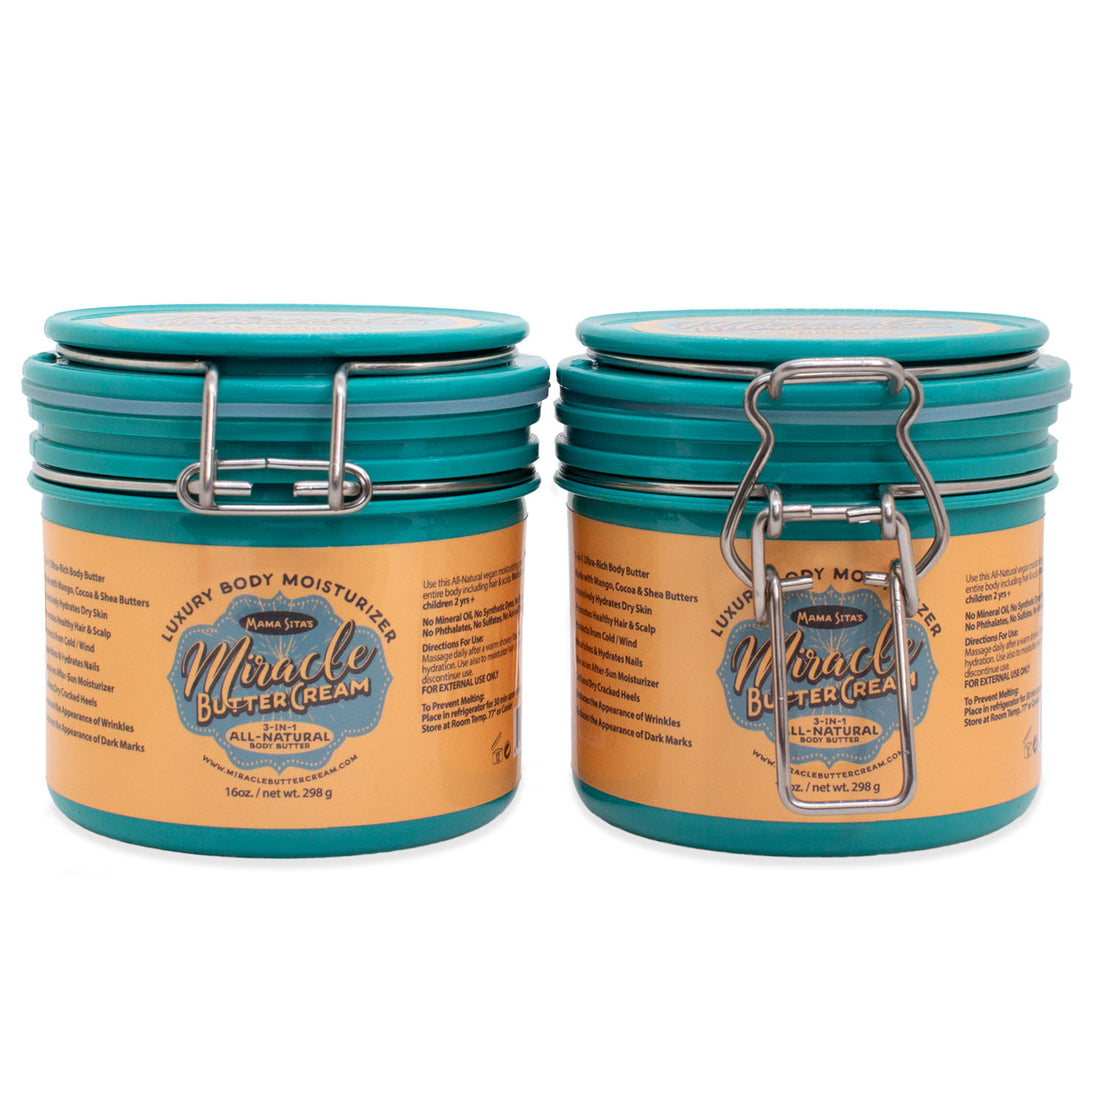 Miracle Butter Cream TWO 16oz. LG Miracle Butter Cream - BUNDLE &amp; SAVE $12, miraclebuttercream.com